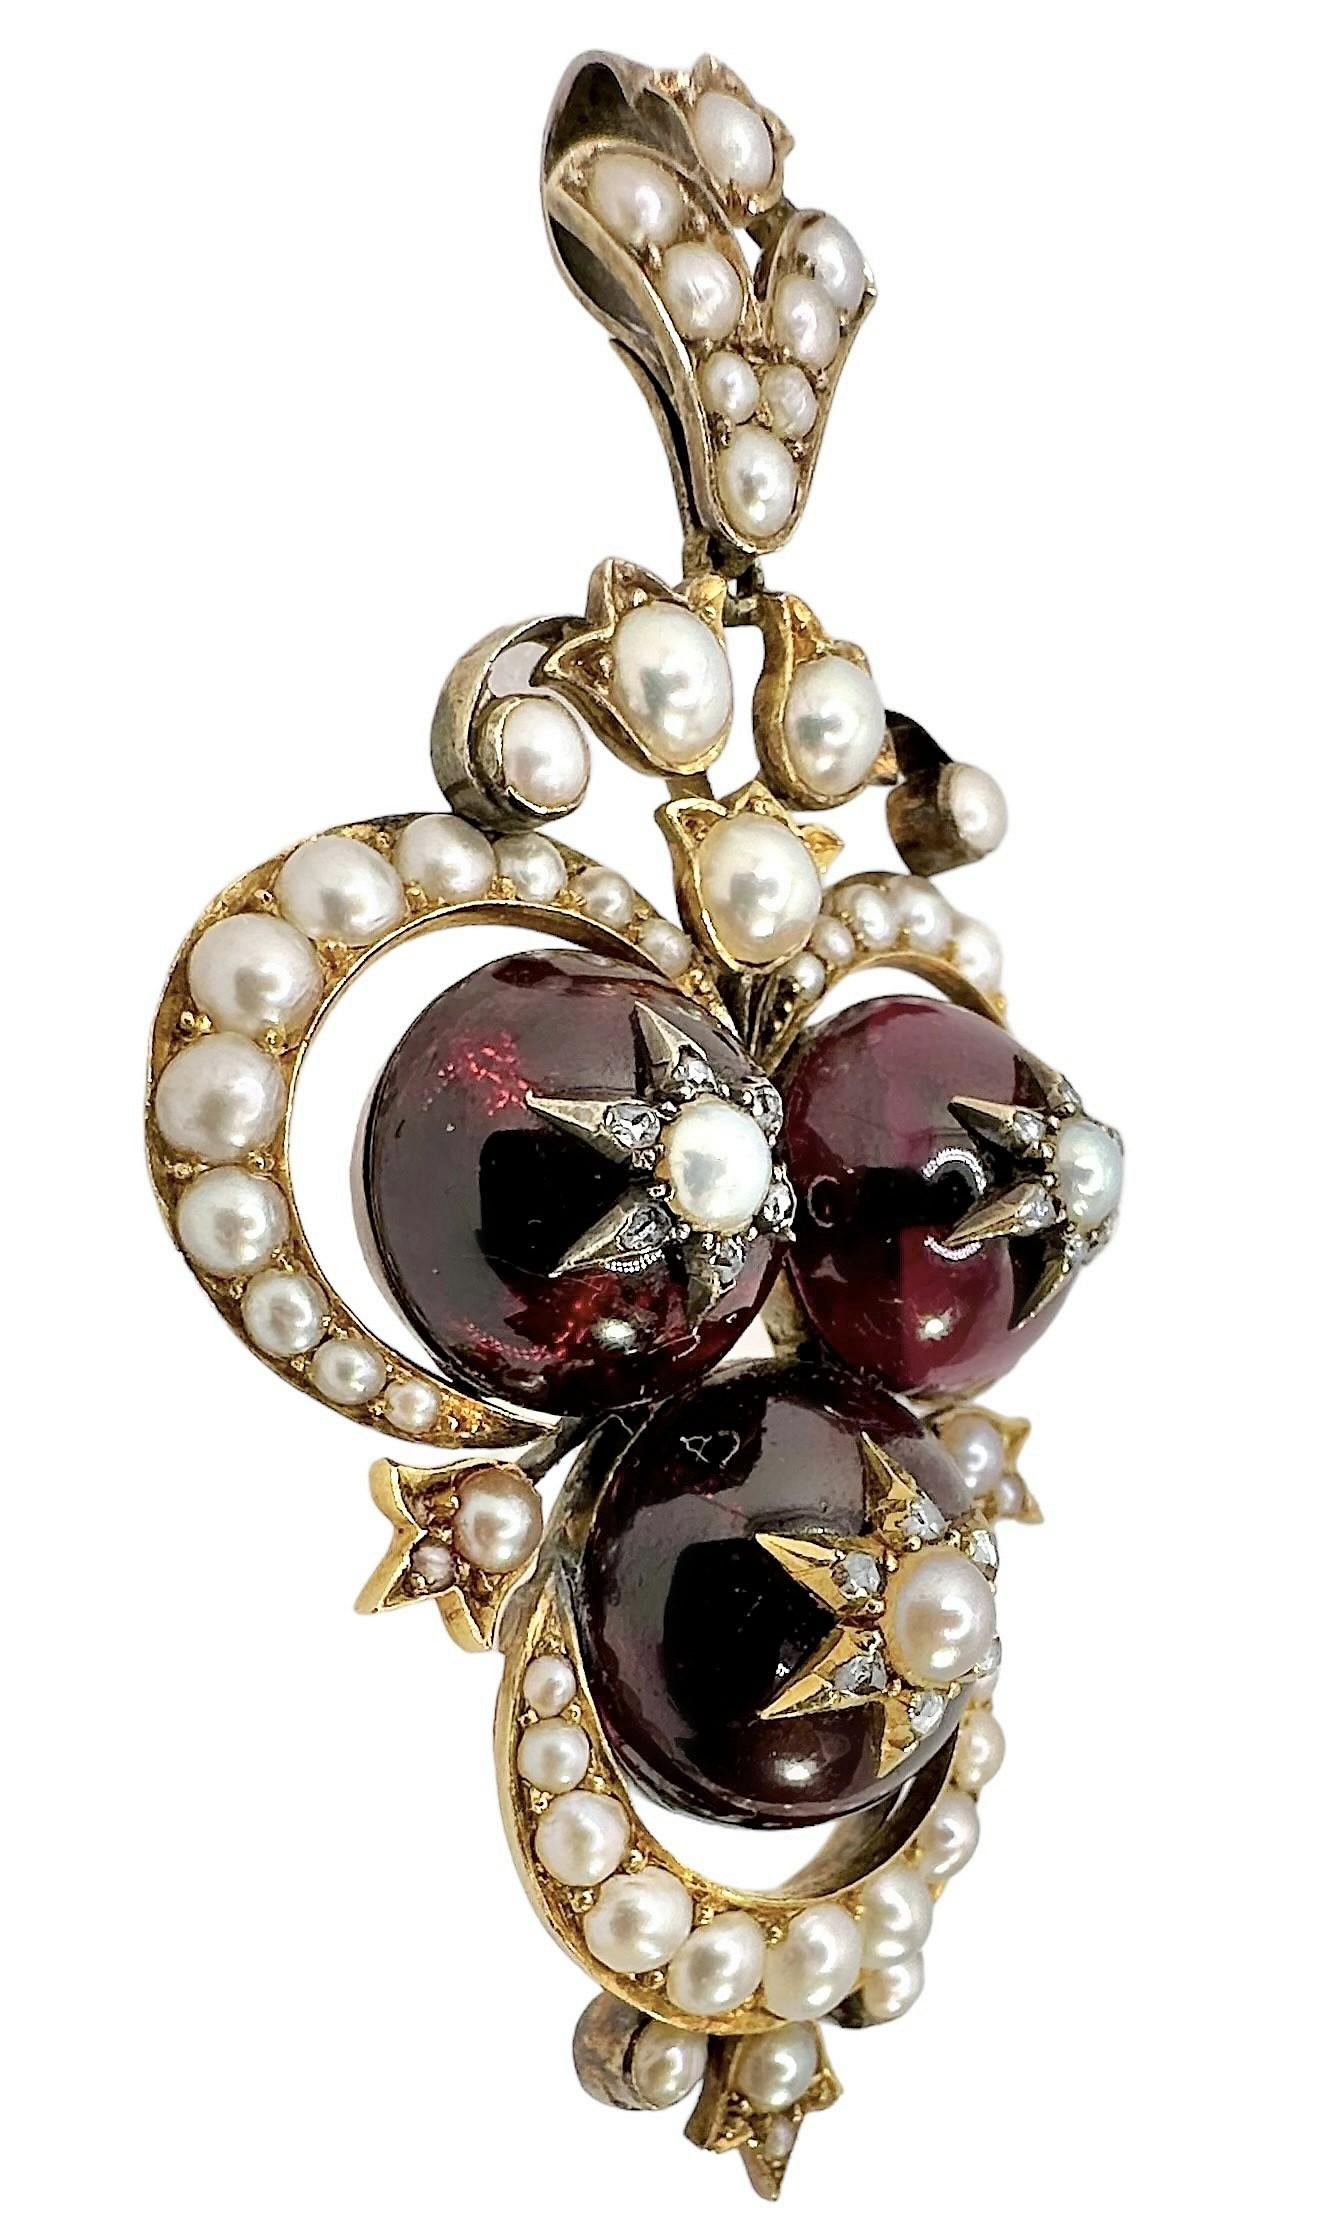 This unique Late-19th Century, Victorian period 18k gold, pendant is beautifully crafted with carbuncle and half pearls. With a total height from the very bottom to the top of the bale of 2.75 inches, and a width of 1.5 inches, it is impossible to